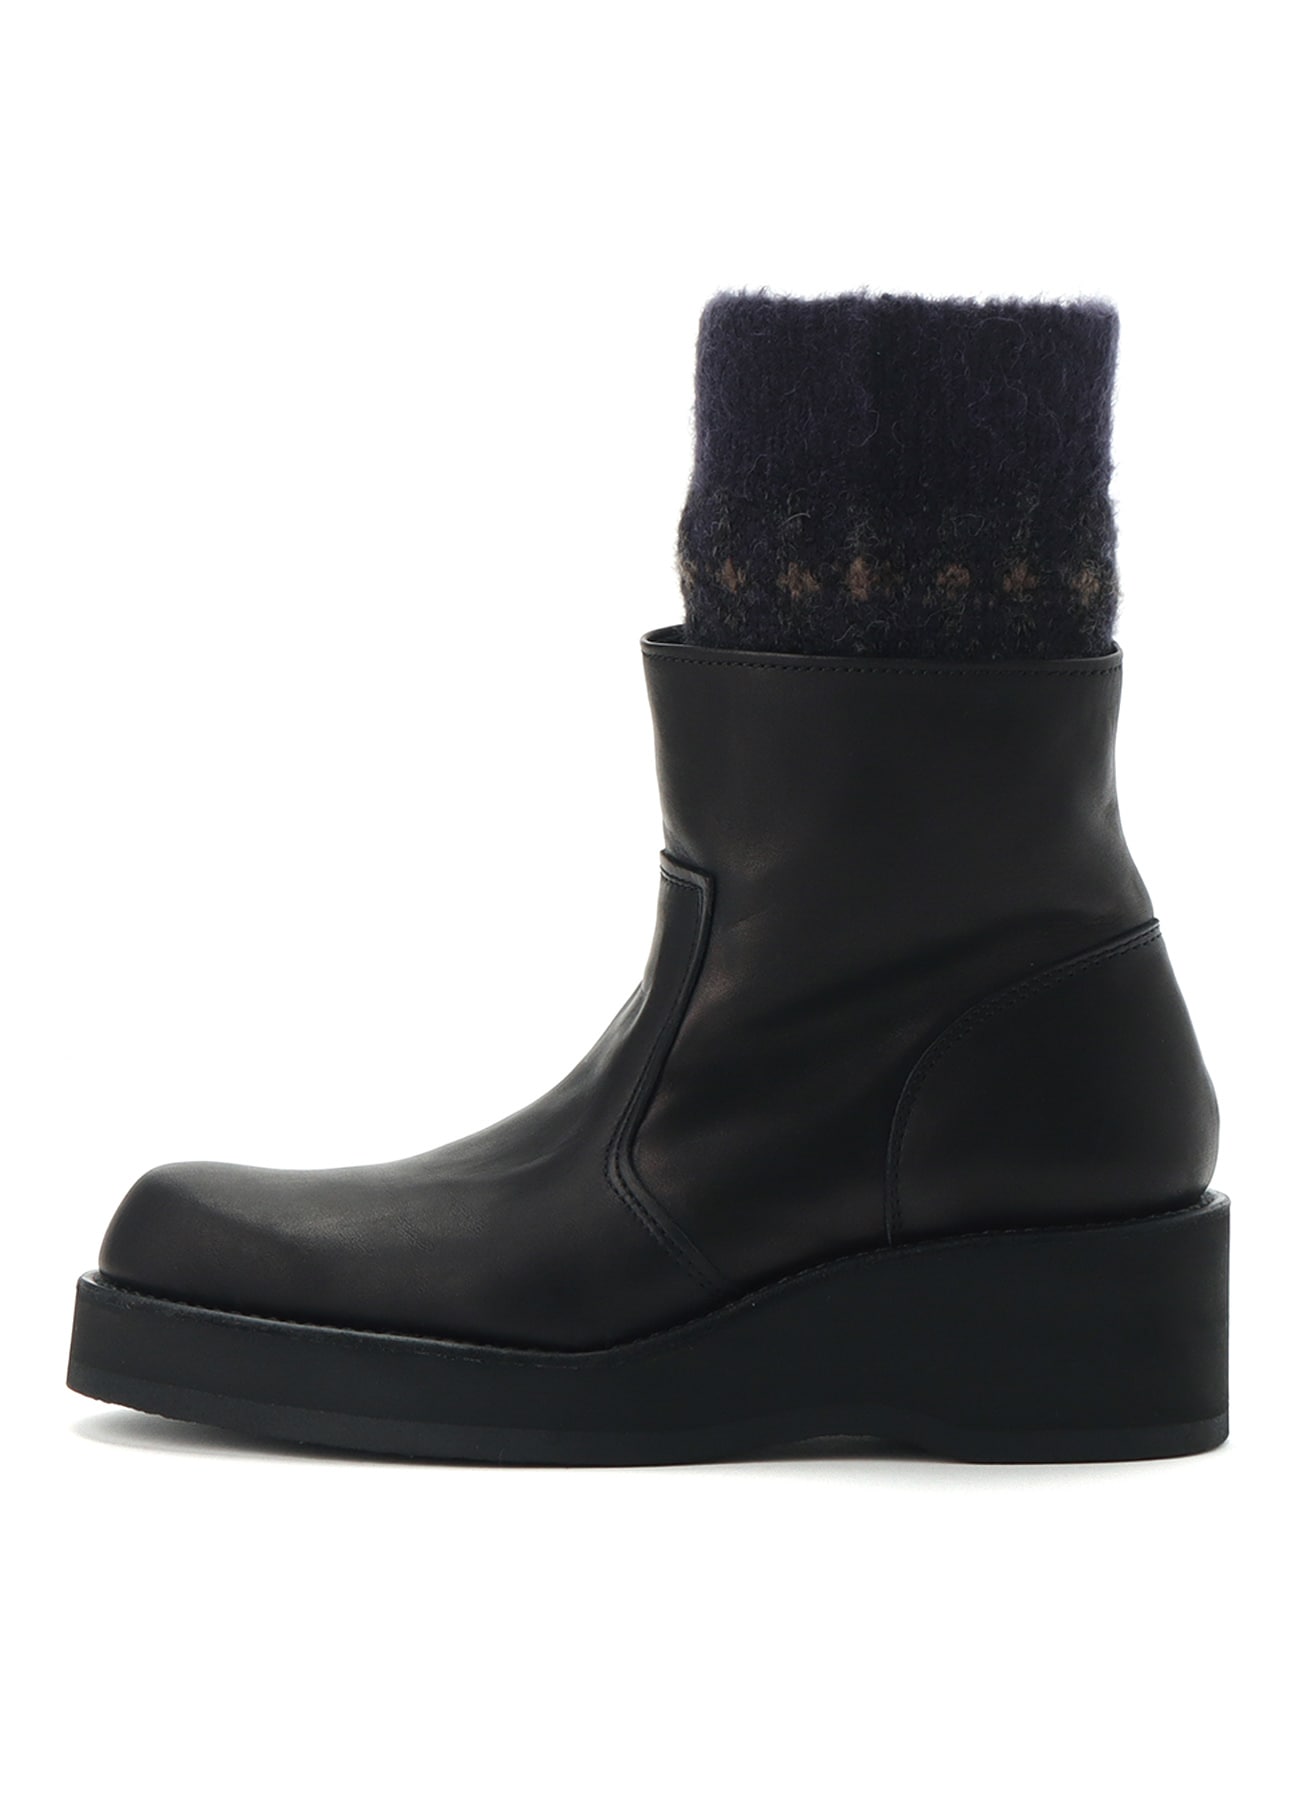 JACQUARD KNIT LEATHER COMBI NORDIC KNITTED BOOTS